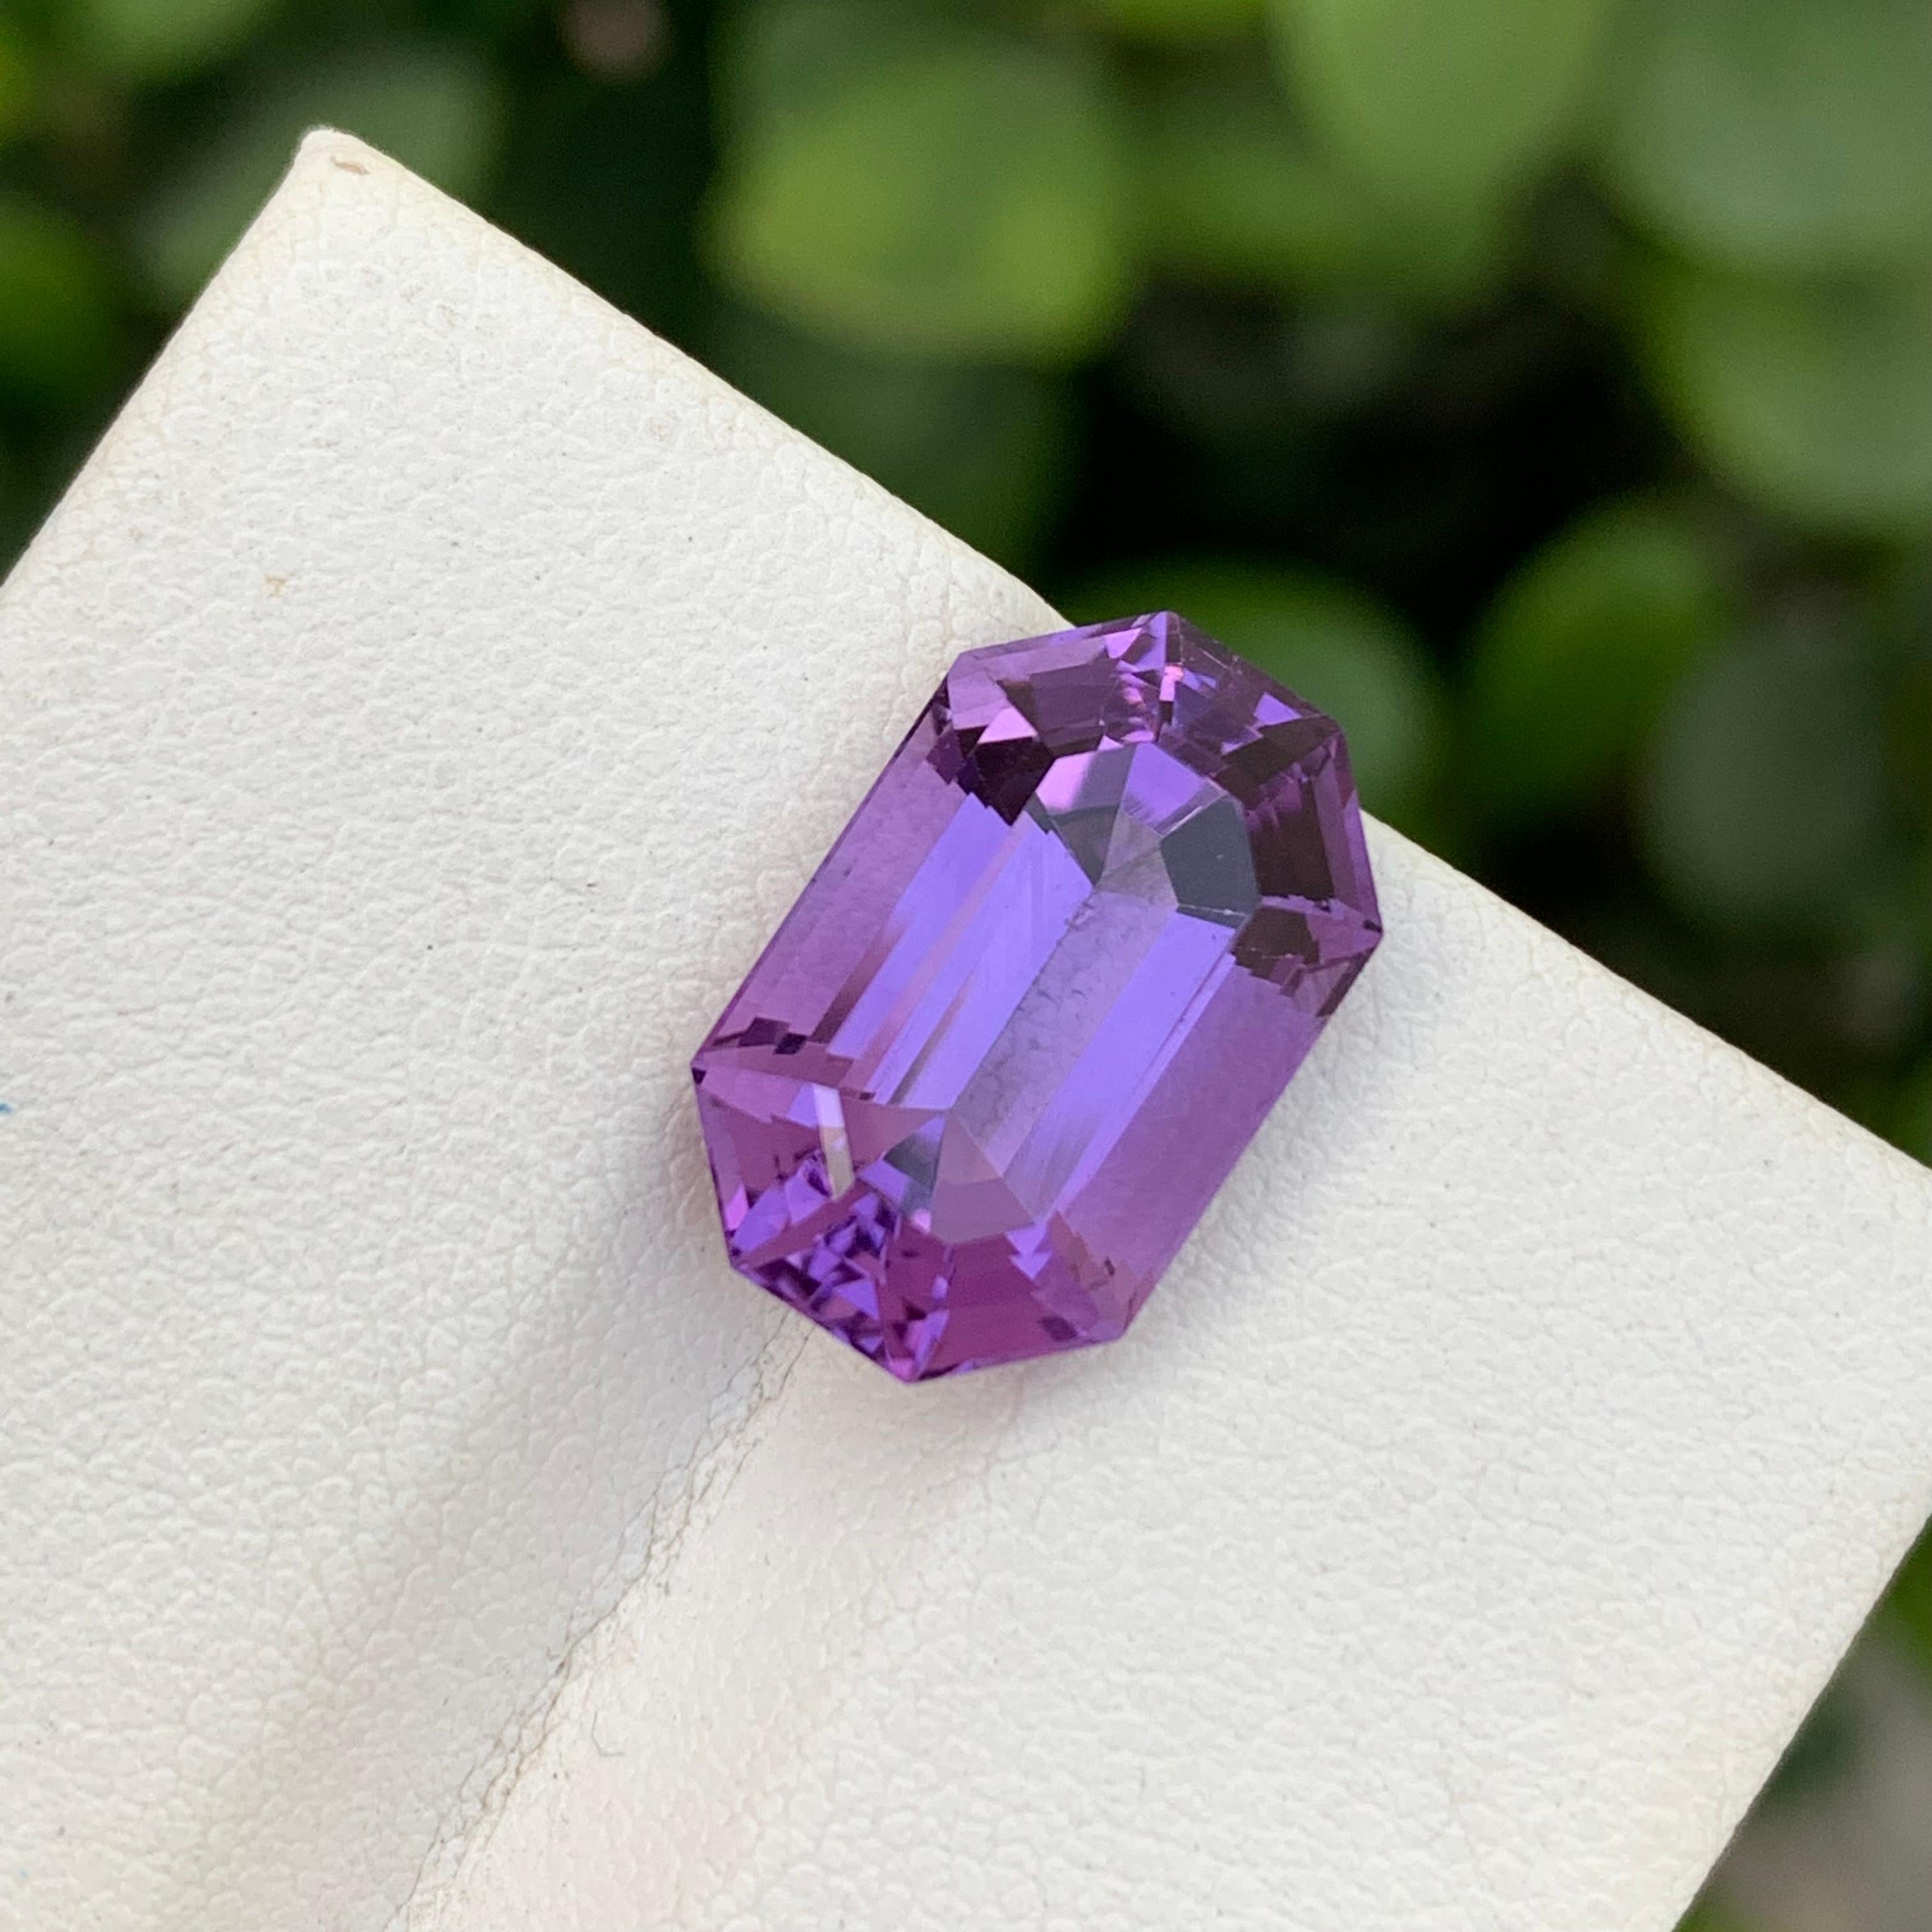 Gemstone Type : Amethyst
Weight : 8.60 Carats
Dimensions : 15.2x9.8x8.6 mm
Clarity : Eye Clean
Origin : Brazil
Color: Purple
Shape: Emerald Octagon
Certificate: On Demand
Month: February
Purported amethyst powers for healing
enhancing the immune